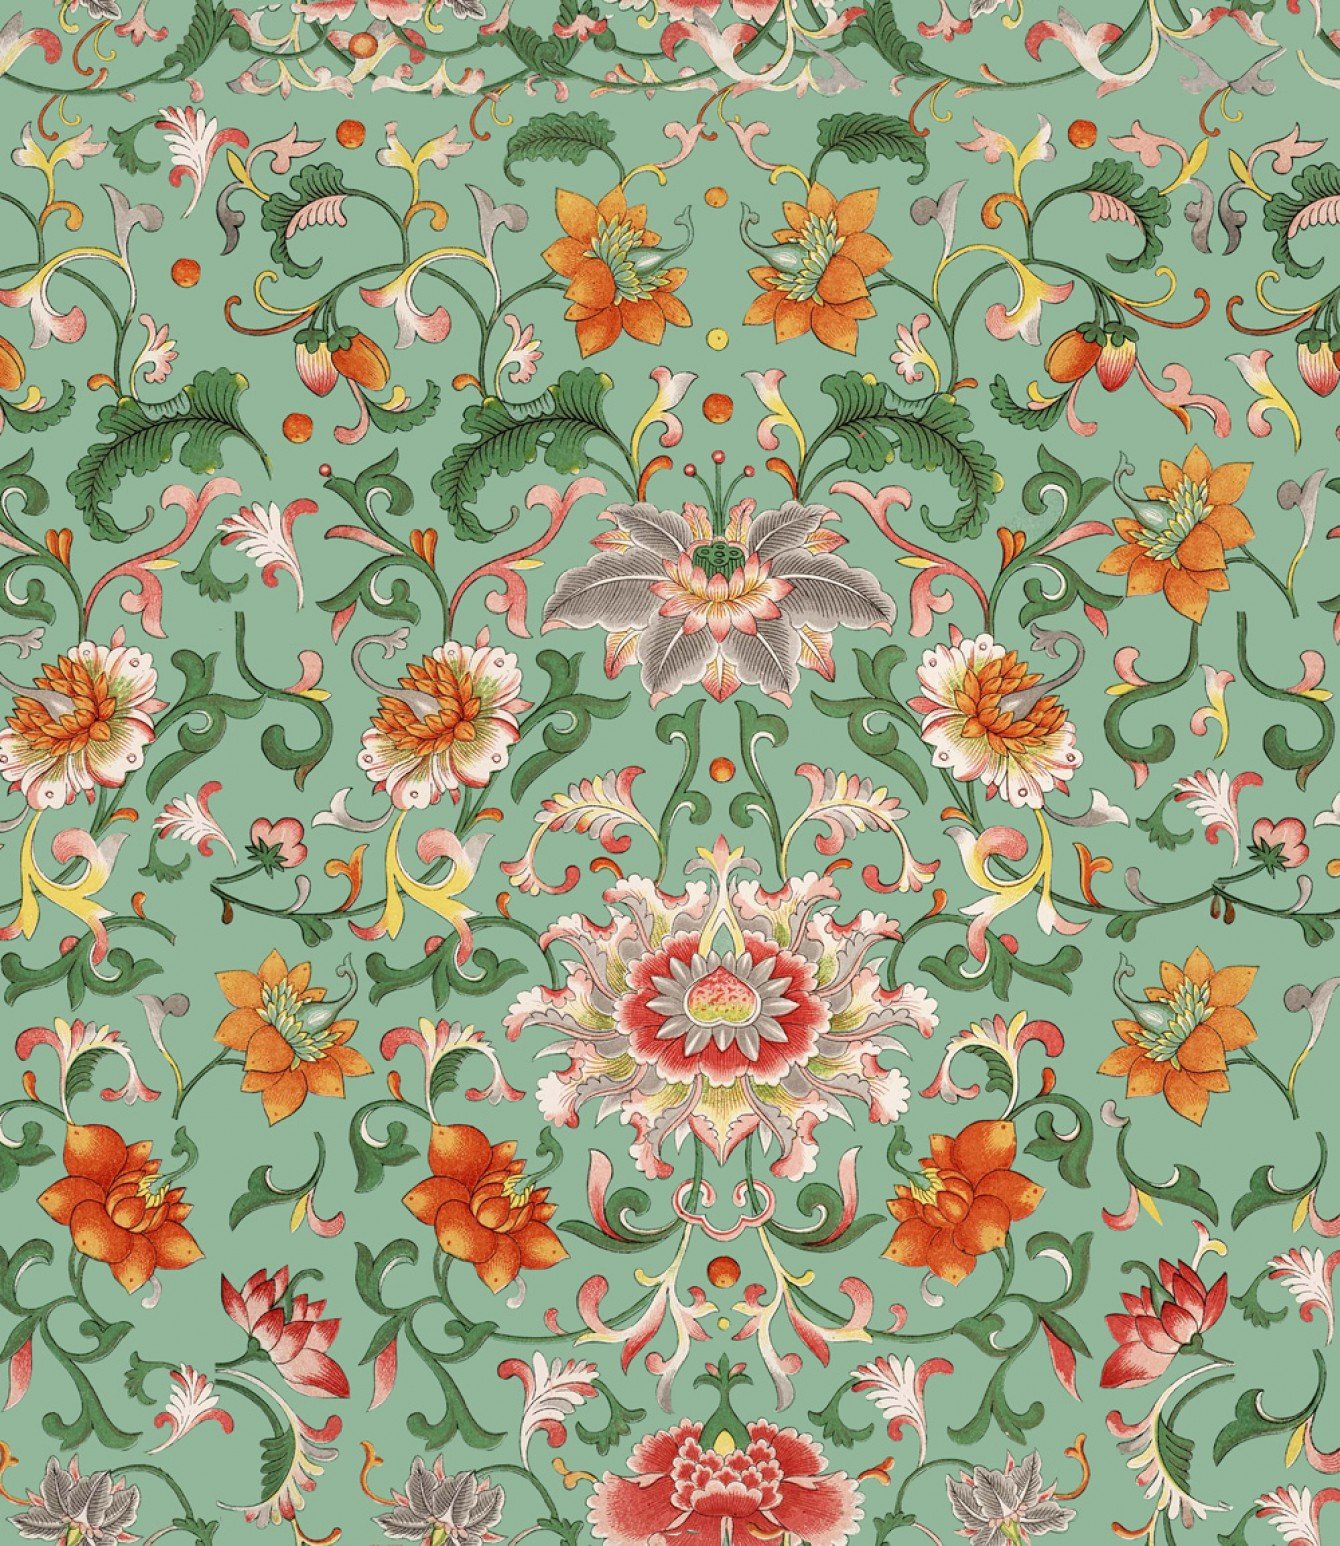 Chinese Floral Wallpaper In Green And Orange From The Eclectic